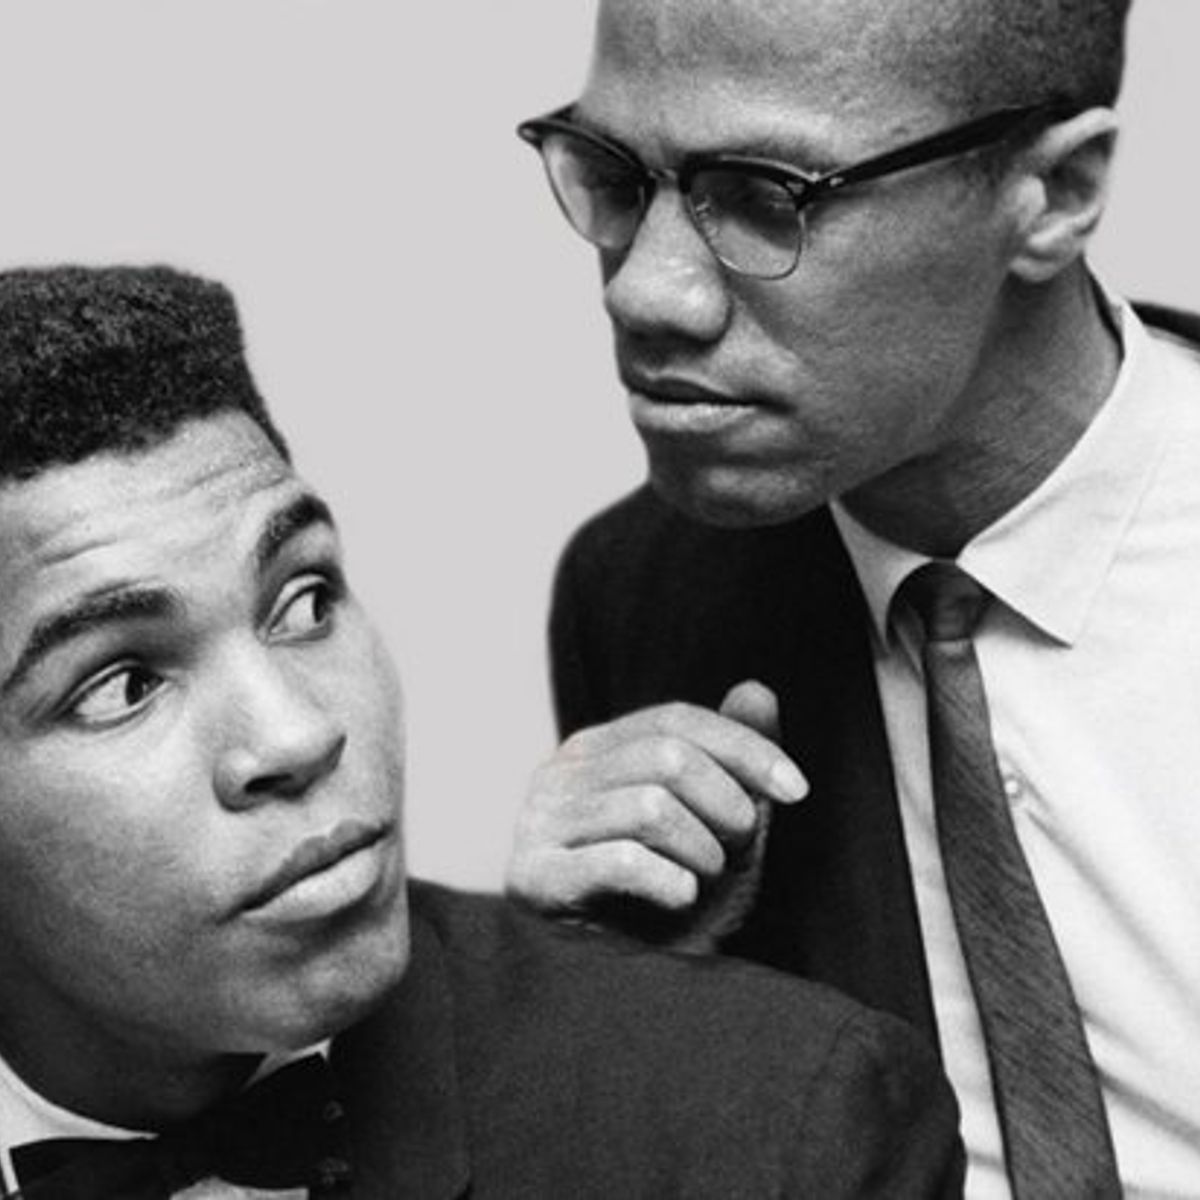 Malcolm's close relationship with Cassius Clay prompted Cassius to join the NOI in 1962, under his mentor guidance Cassius adopted a new name to mark his transformation: Mohamed Ali. This was a major coup for the group, helping to spread their message and drive recruitment.